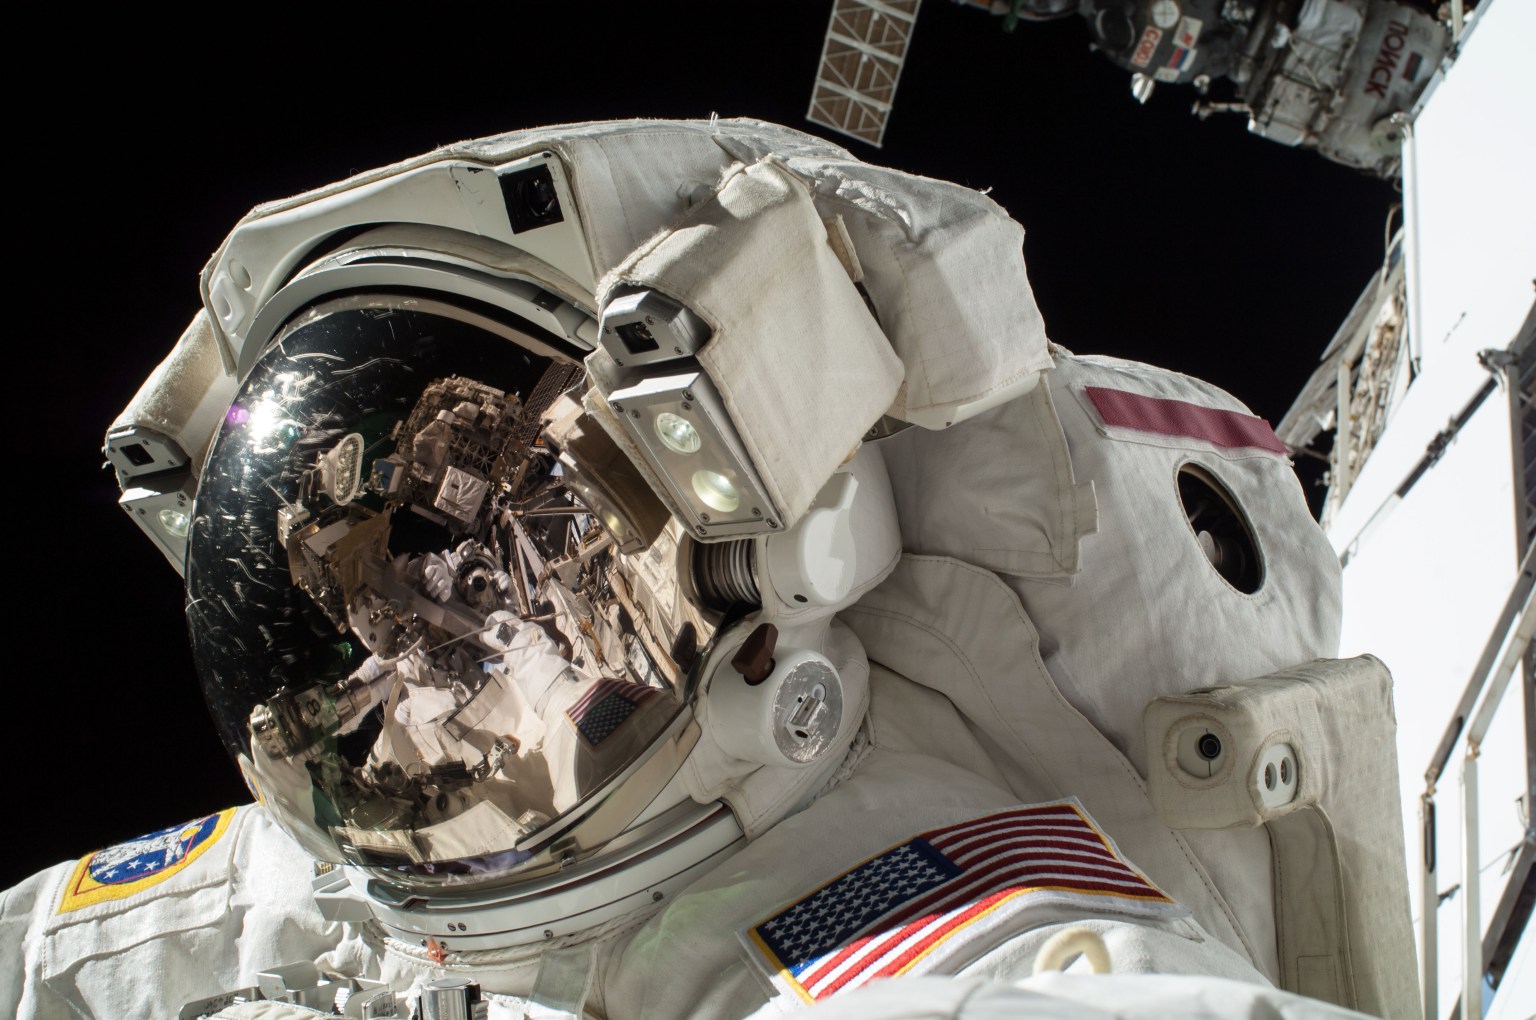 View of Reid Wiseman, Expedition 41 Flight Engineer (FE), in his Extravehicular Mobility Unit (EMU), during Extravehicular Activity 28 (EVA 28)